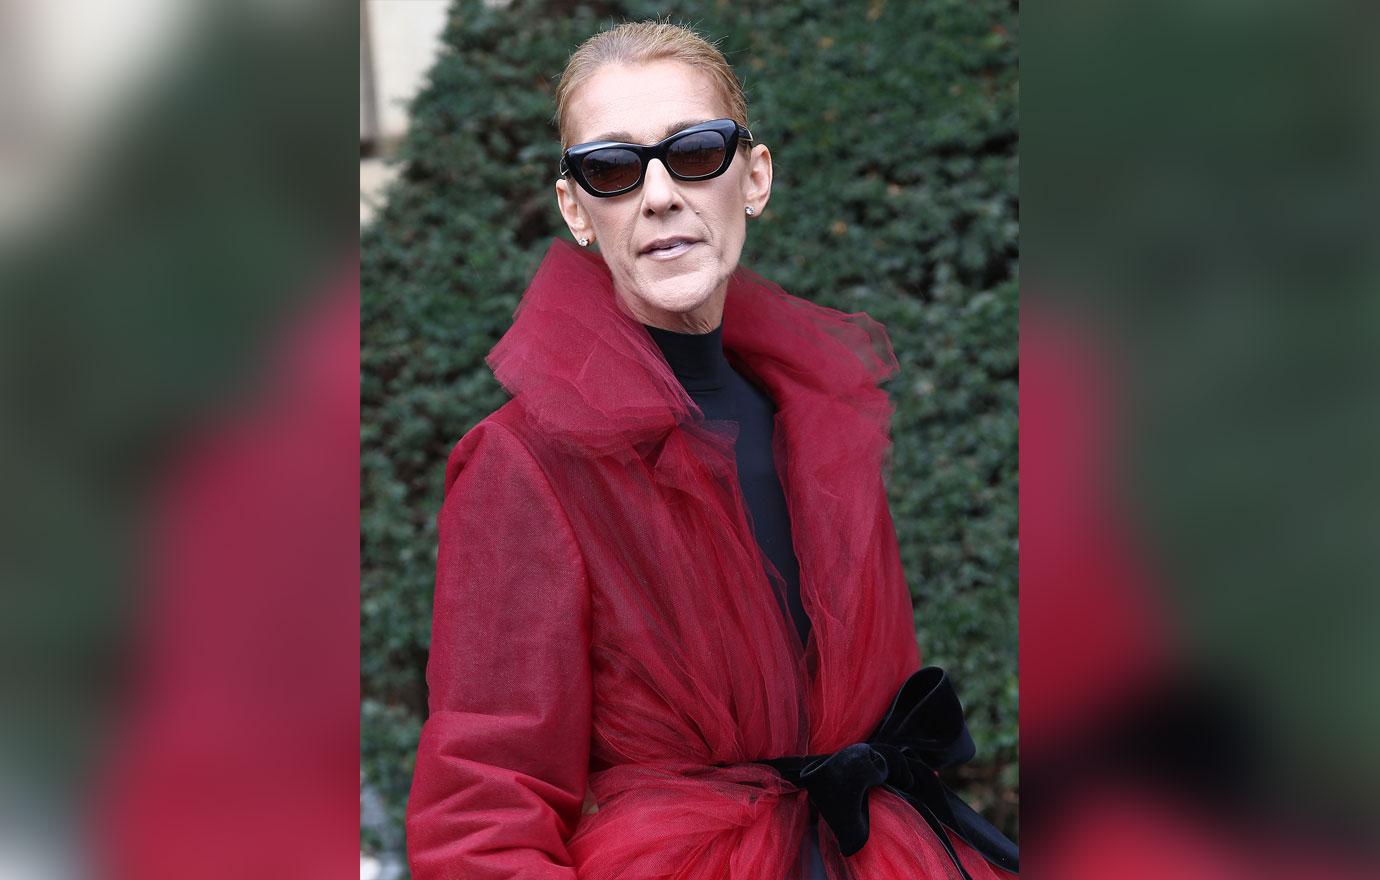 Celine Dion Scary Skinny To Impress Much-Younger Boyfriend: 'She's Starving Herself!'